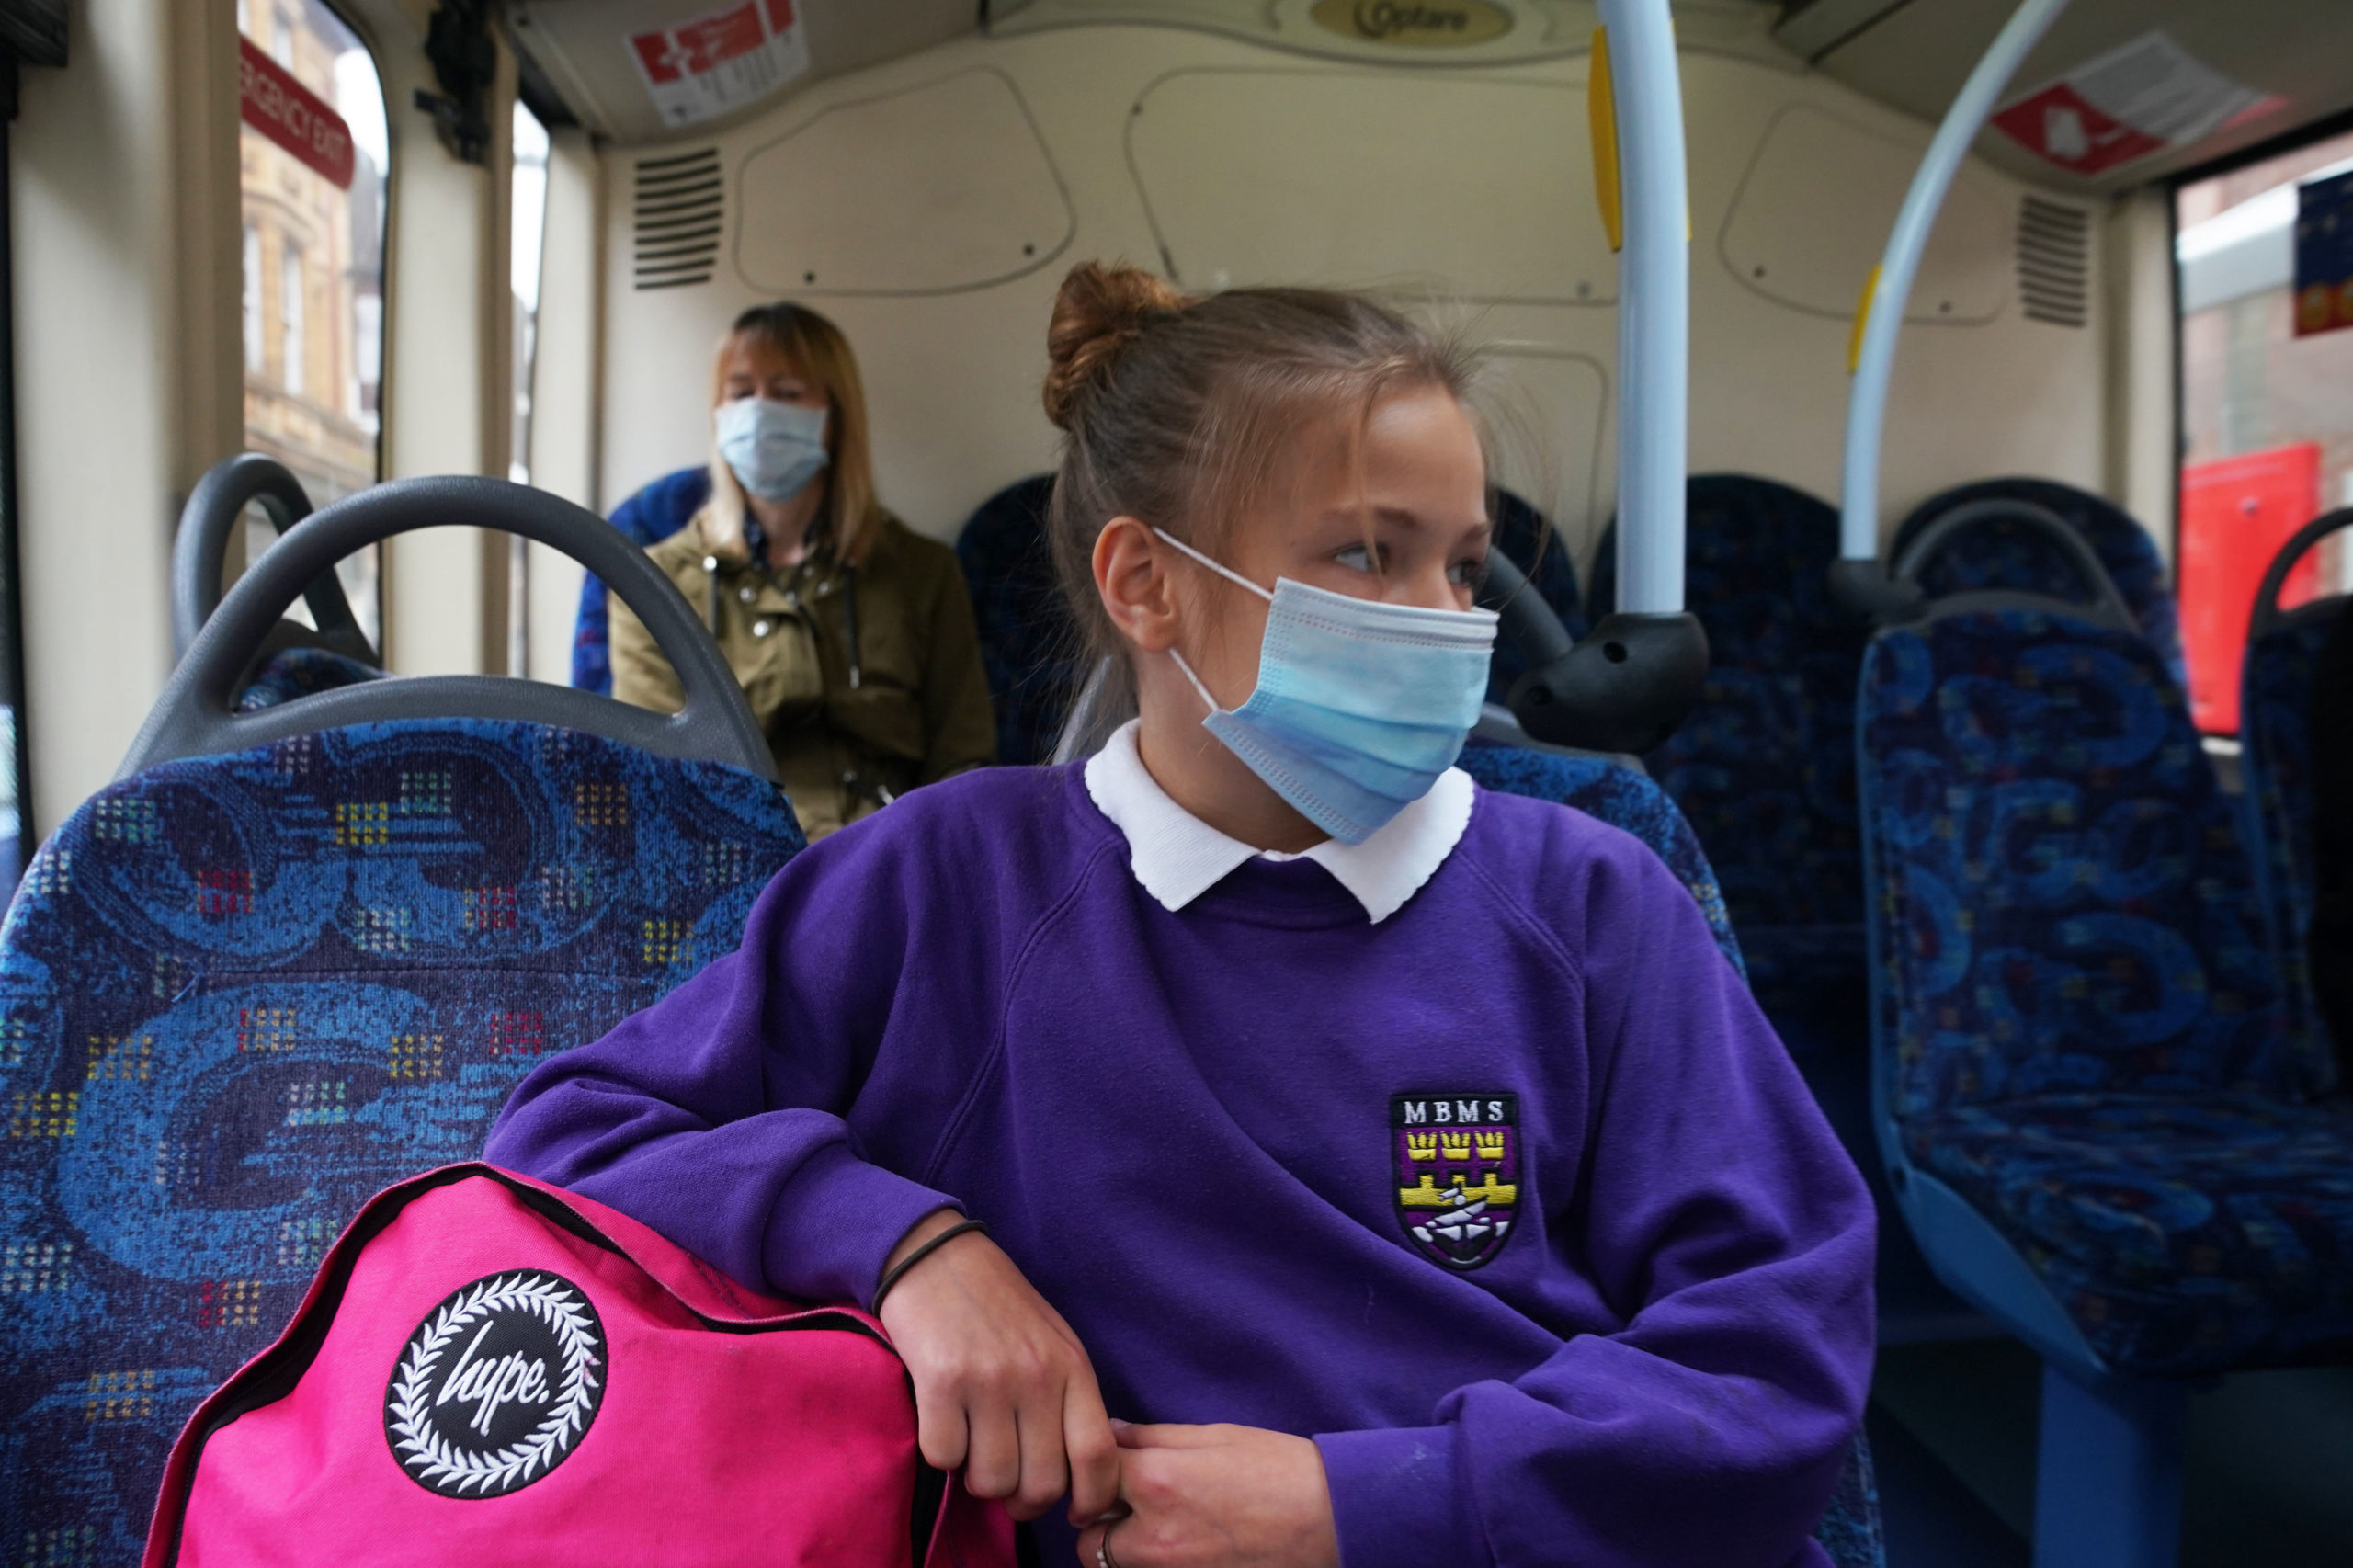 Bus operators in Angus have announced pupils will be required to wear face coverings